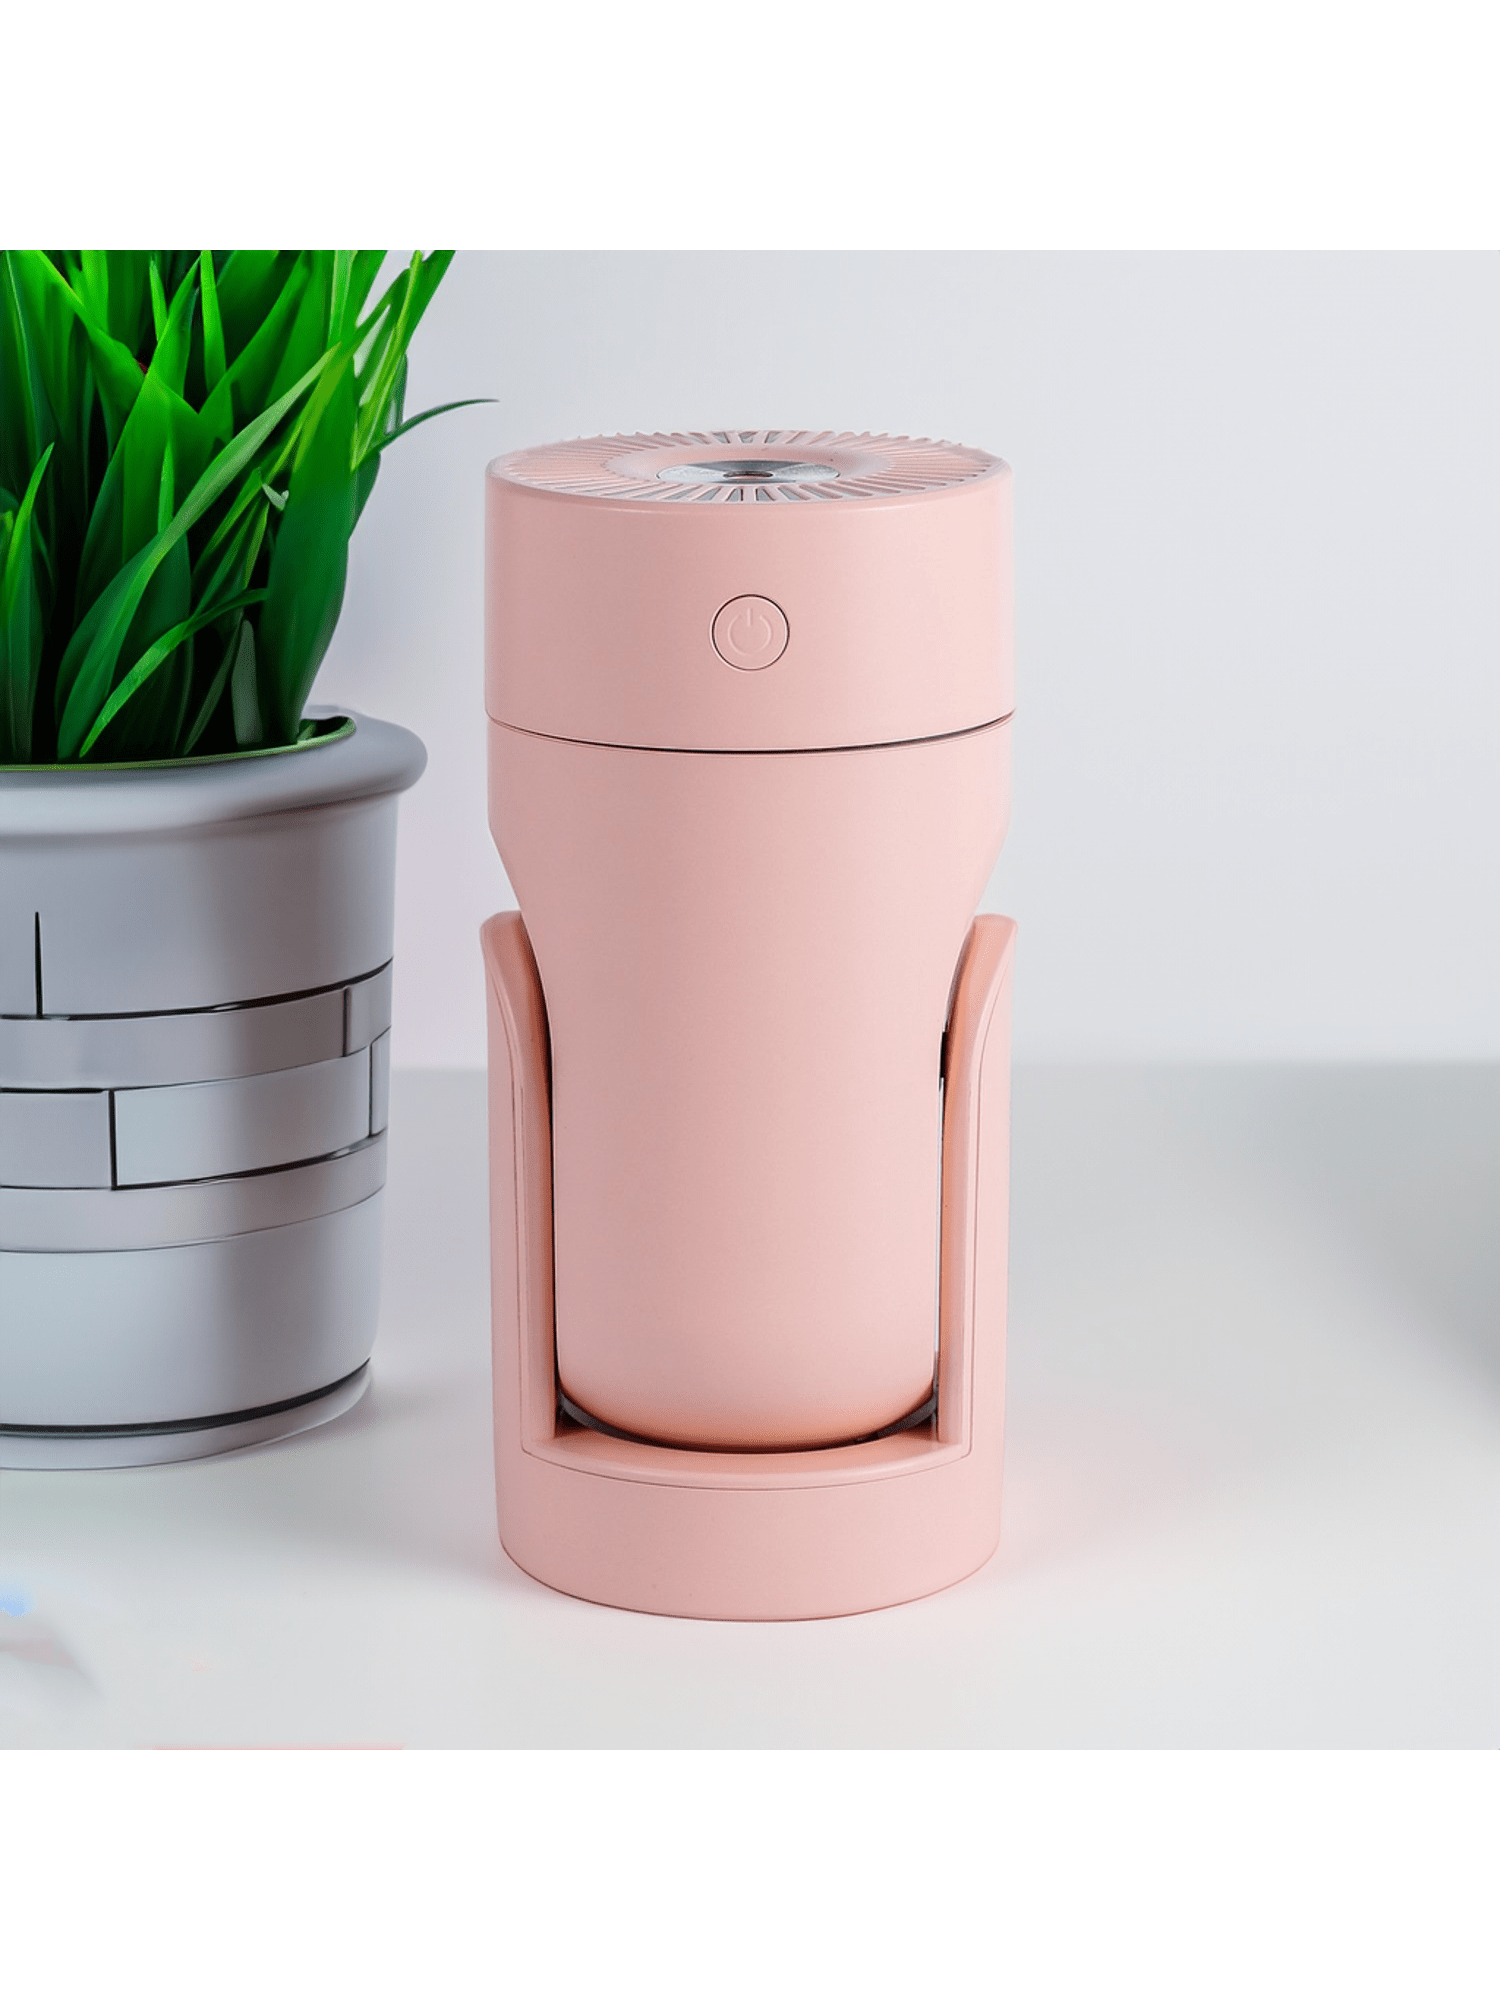 1pc Portable ABS Humidifier, Modern Pink Rechargeable Desktop Atomizer Hydrating Device For Office